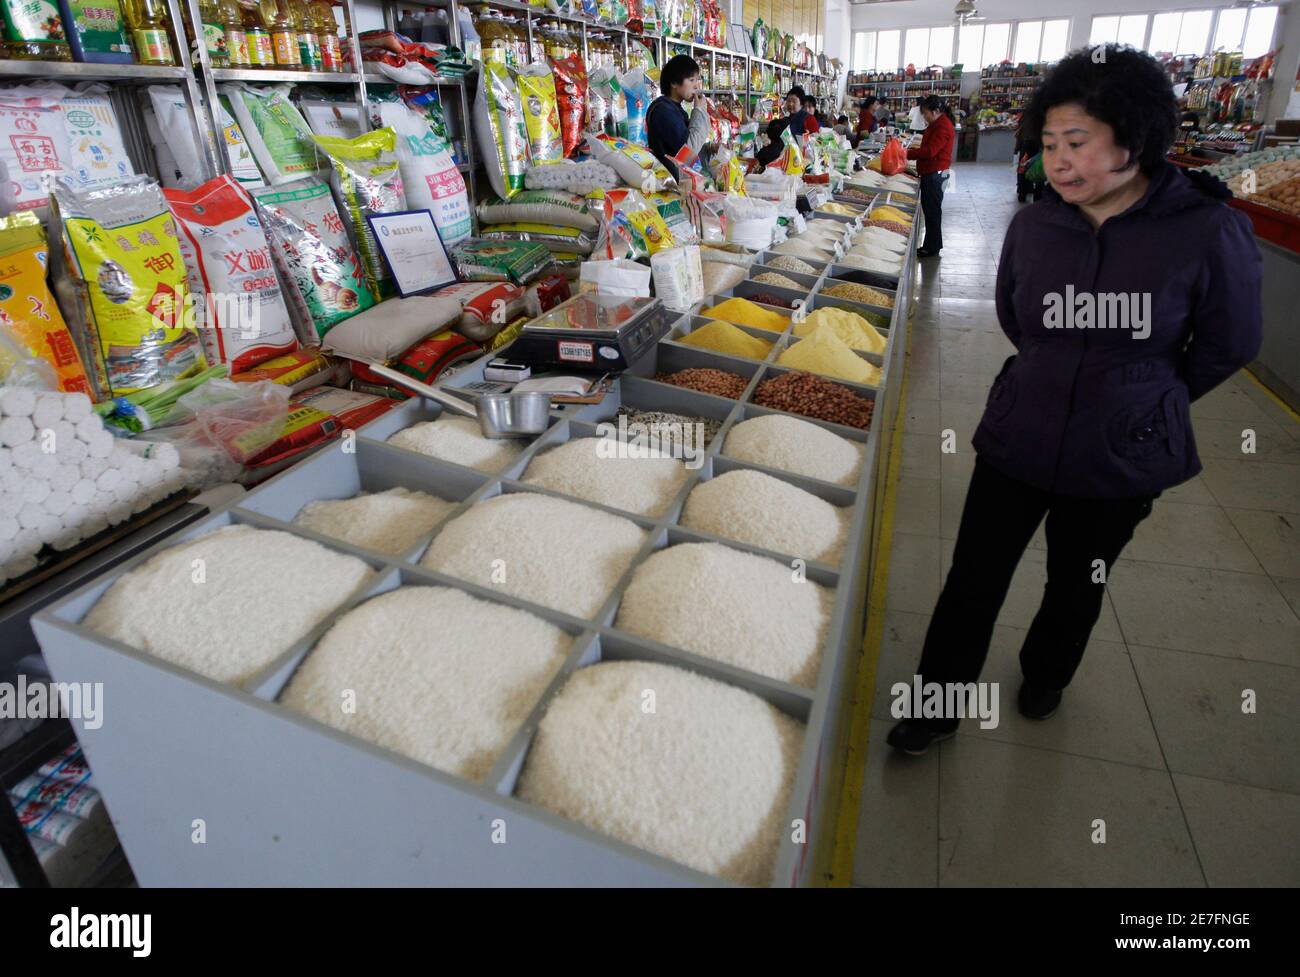 A woman looks at rice at a market in Beijing April 3, 2008. World rice production is set to increase by 1.8 percent this year as government incentives and high prices spur output in Asia and Africa, the United Nations Food and Agriculture Organisation (FAO) said on Wednesday. REUTERS/Jason Lee (CHINA) Stock Photo